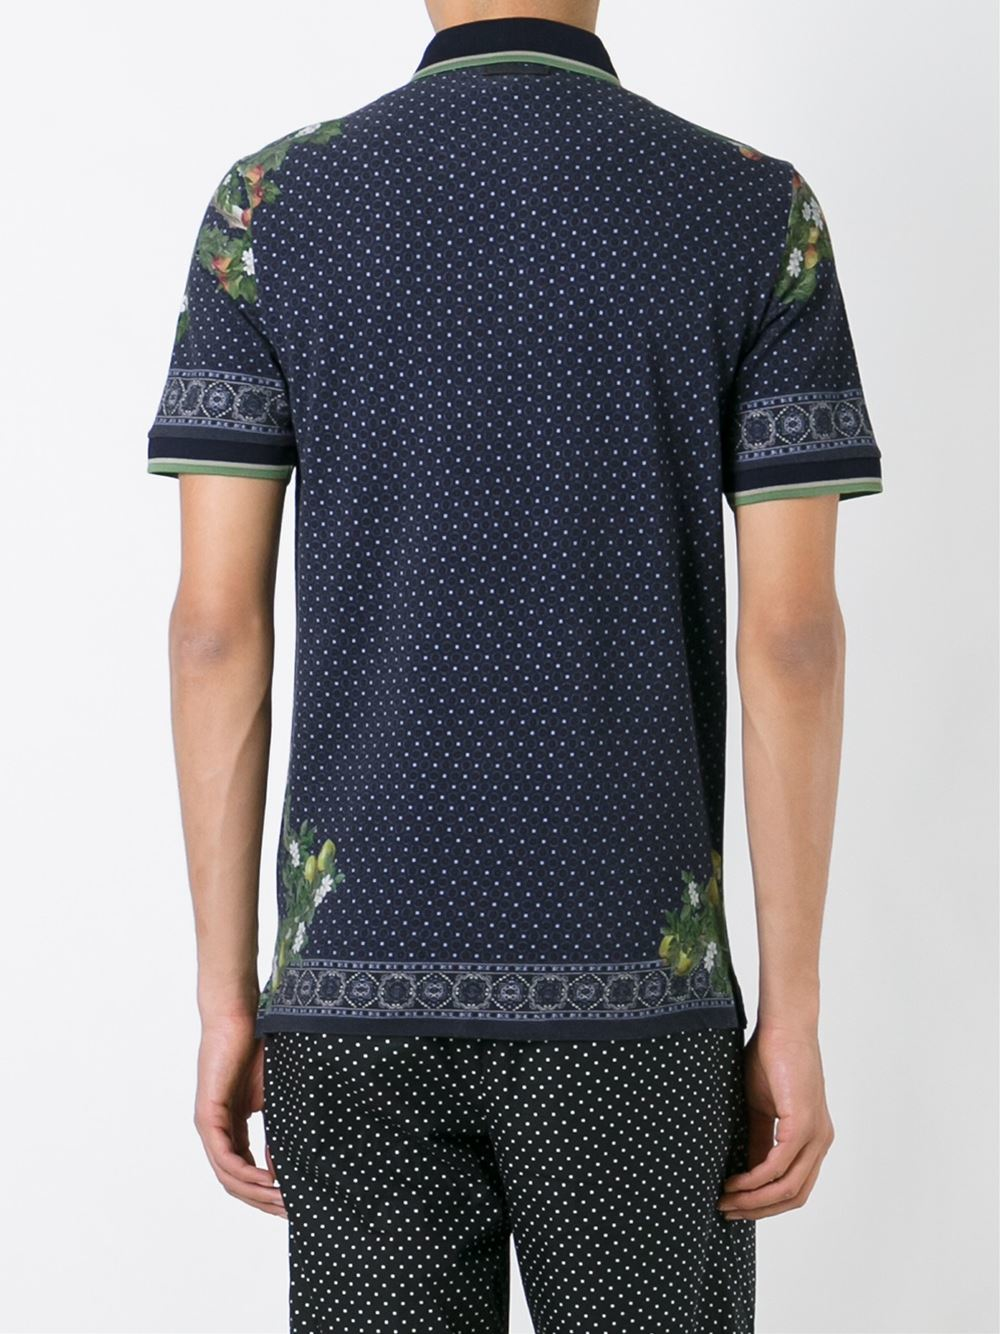 Dolce & Gabbana Cotton Peacock Print Polo Shirt in Blue for Men - Lyst